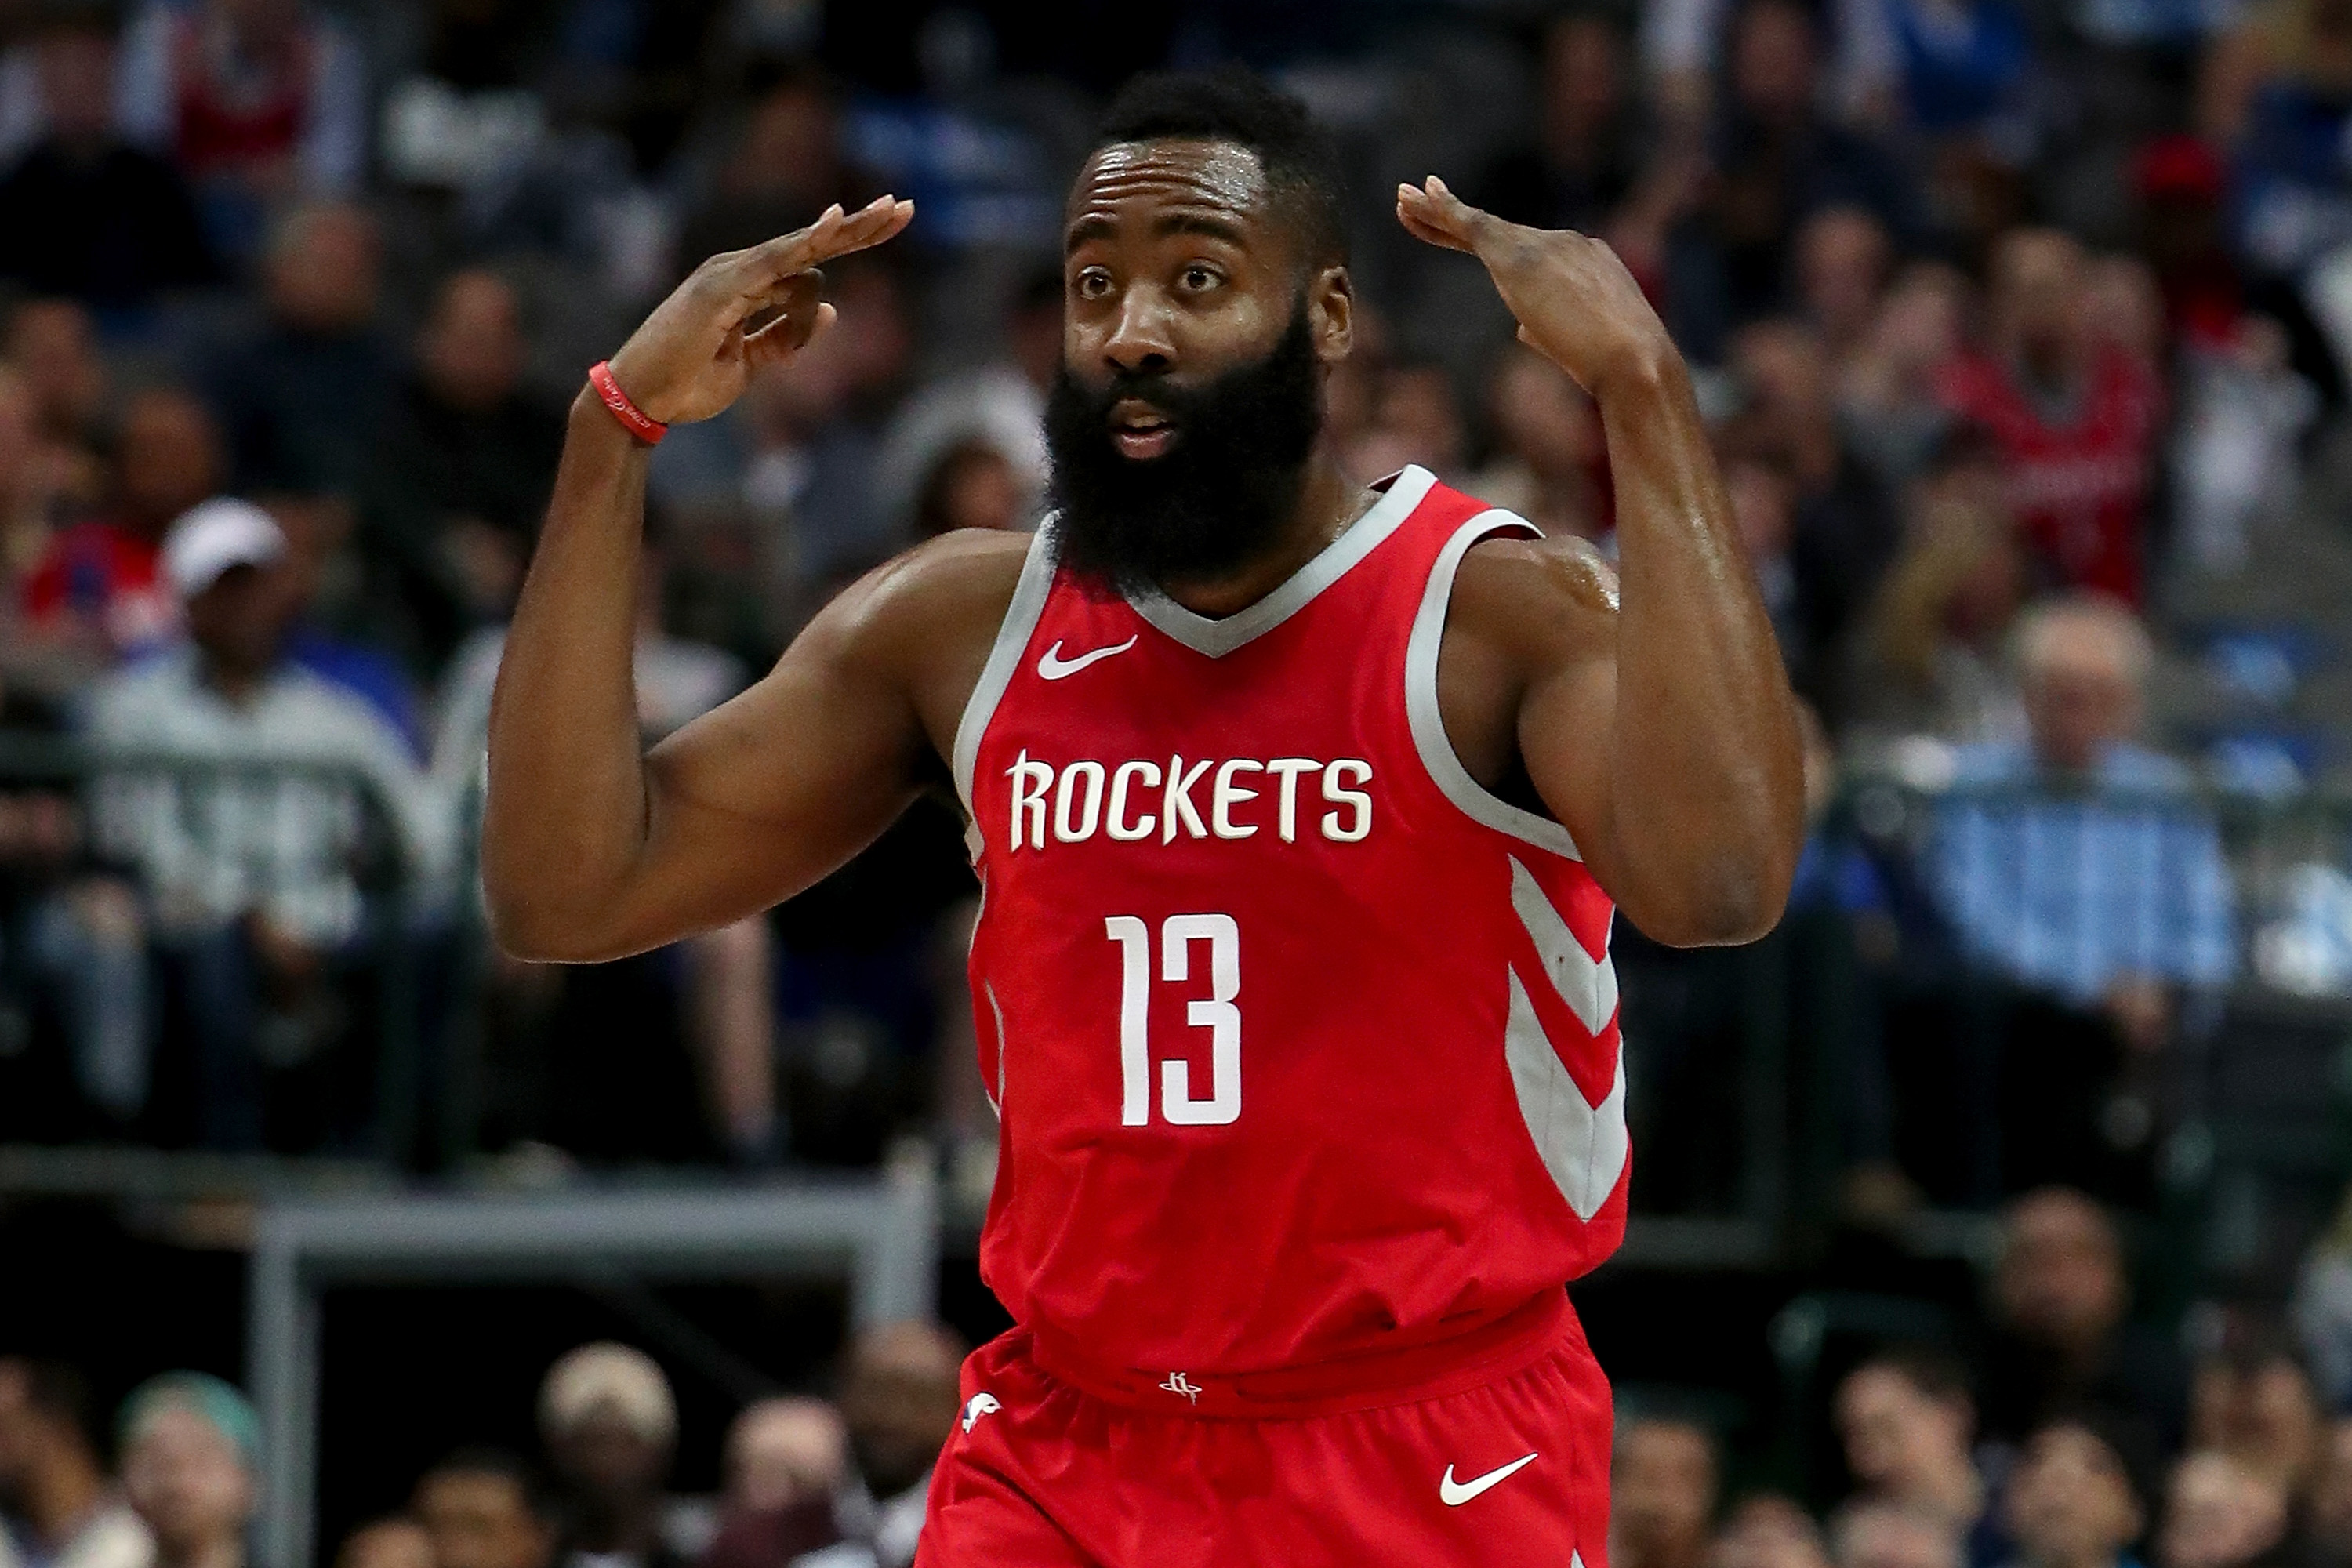 Harden has first 60-point triple-double in NBA history